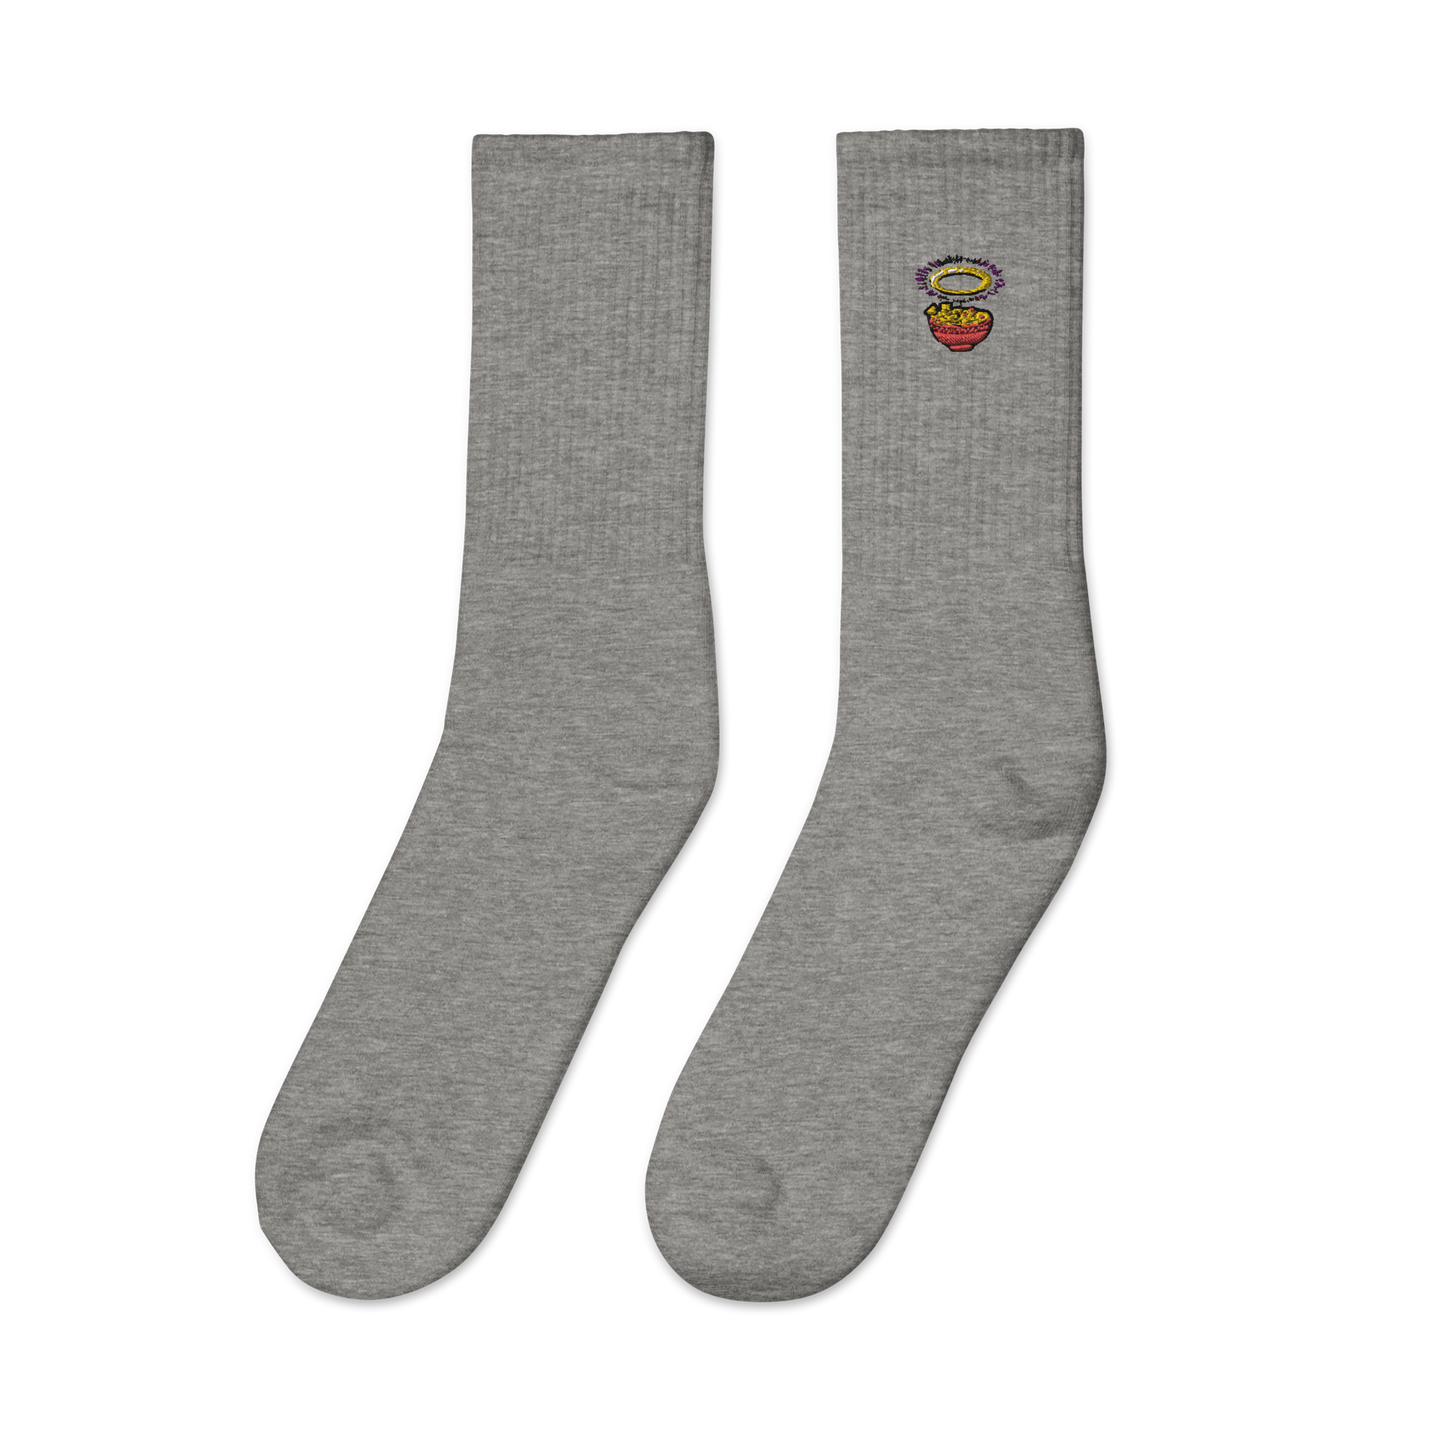 Holy Guacamole Embroidered socks